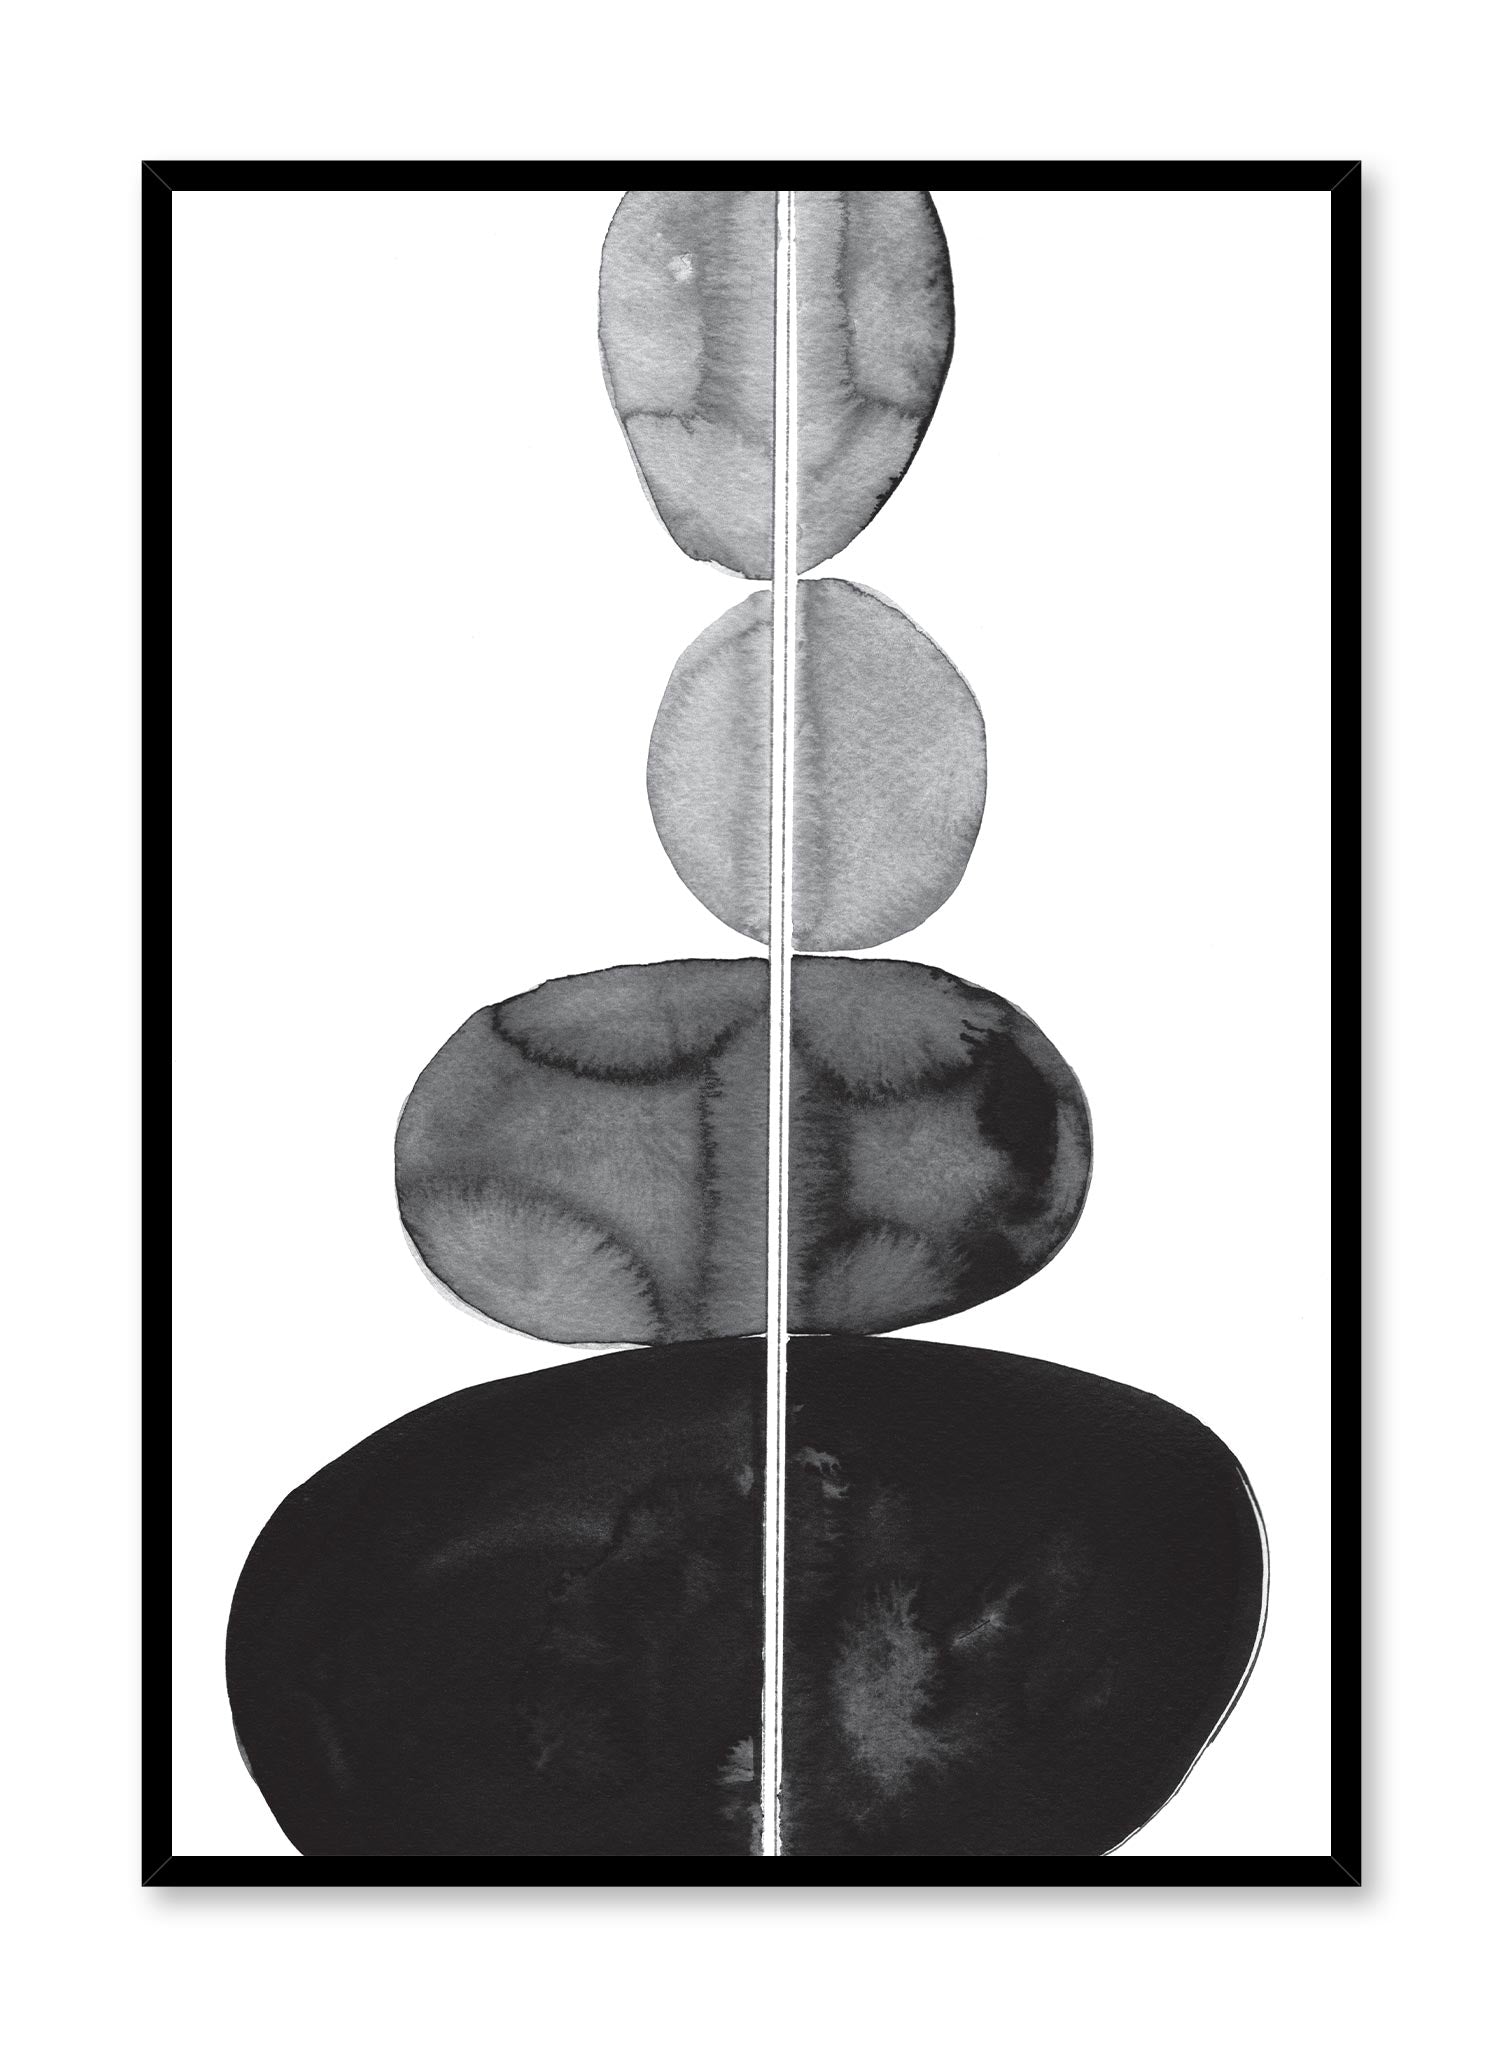 Cairn is a minimalist illustration by Opposite Wall of four stacked stones from small to big all slashed vertically down the center drawn in ink.